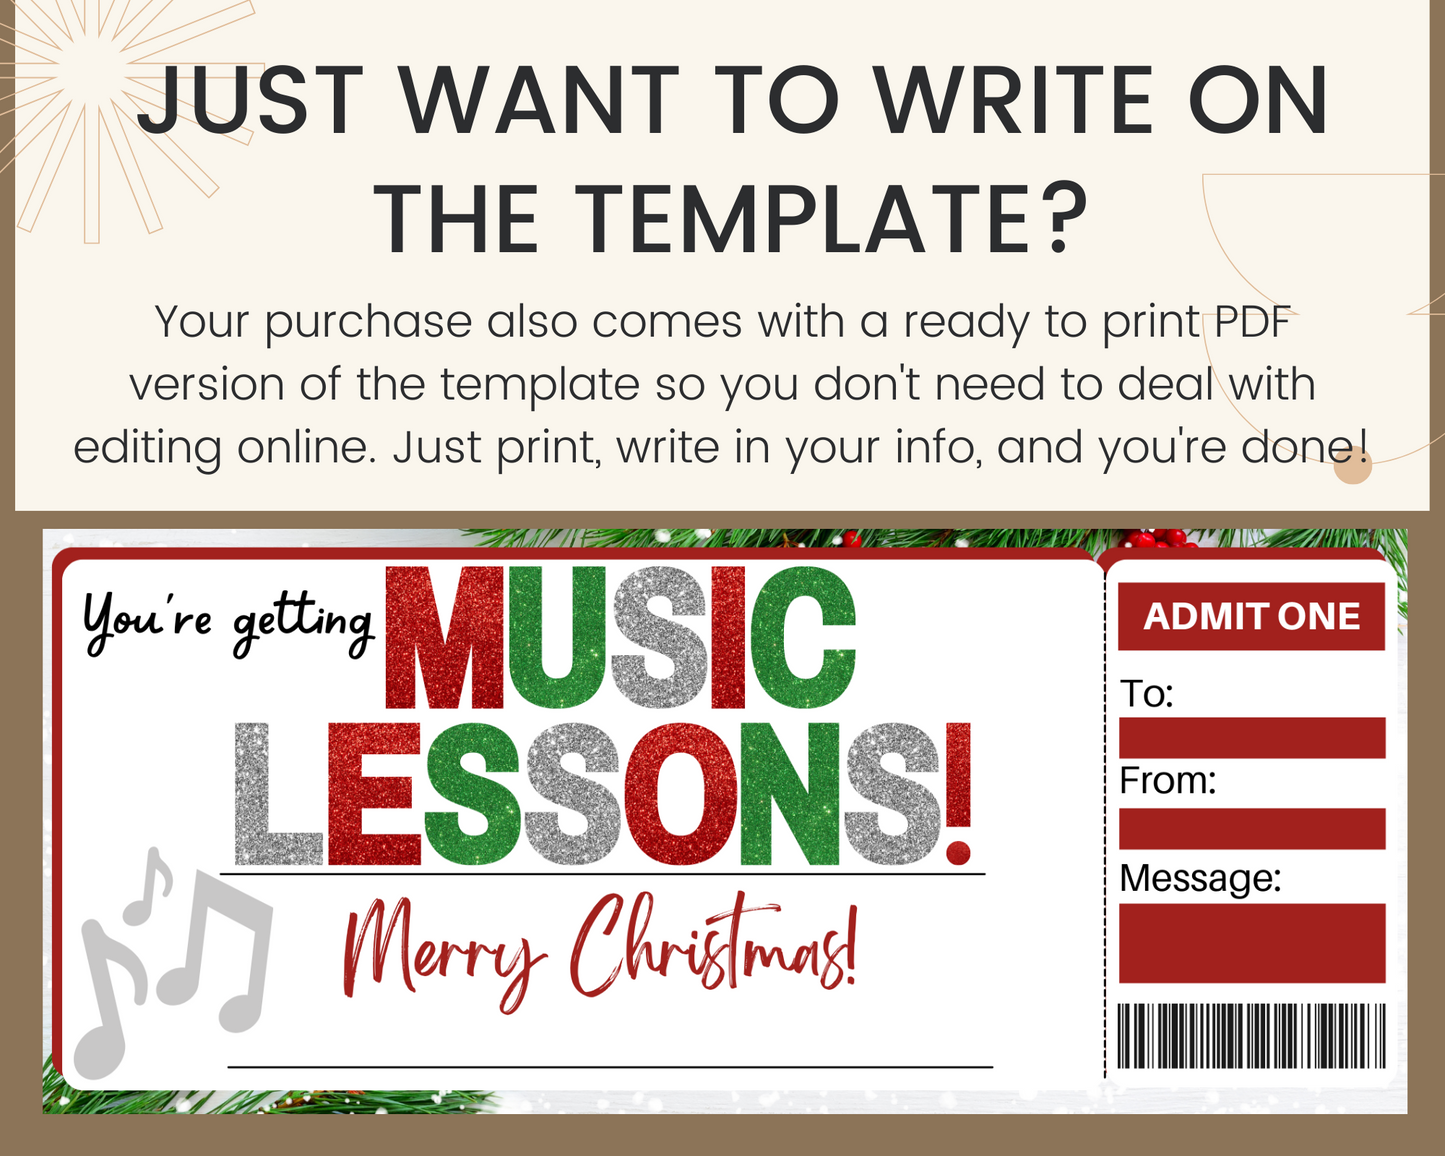 Christmas Music Lessons Gift Certificate